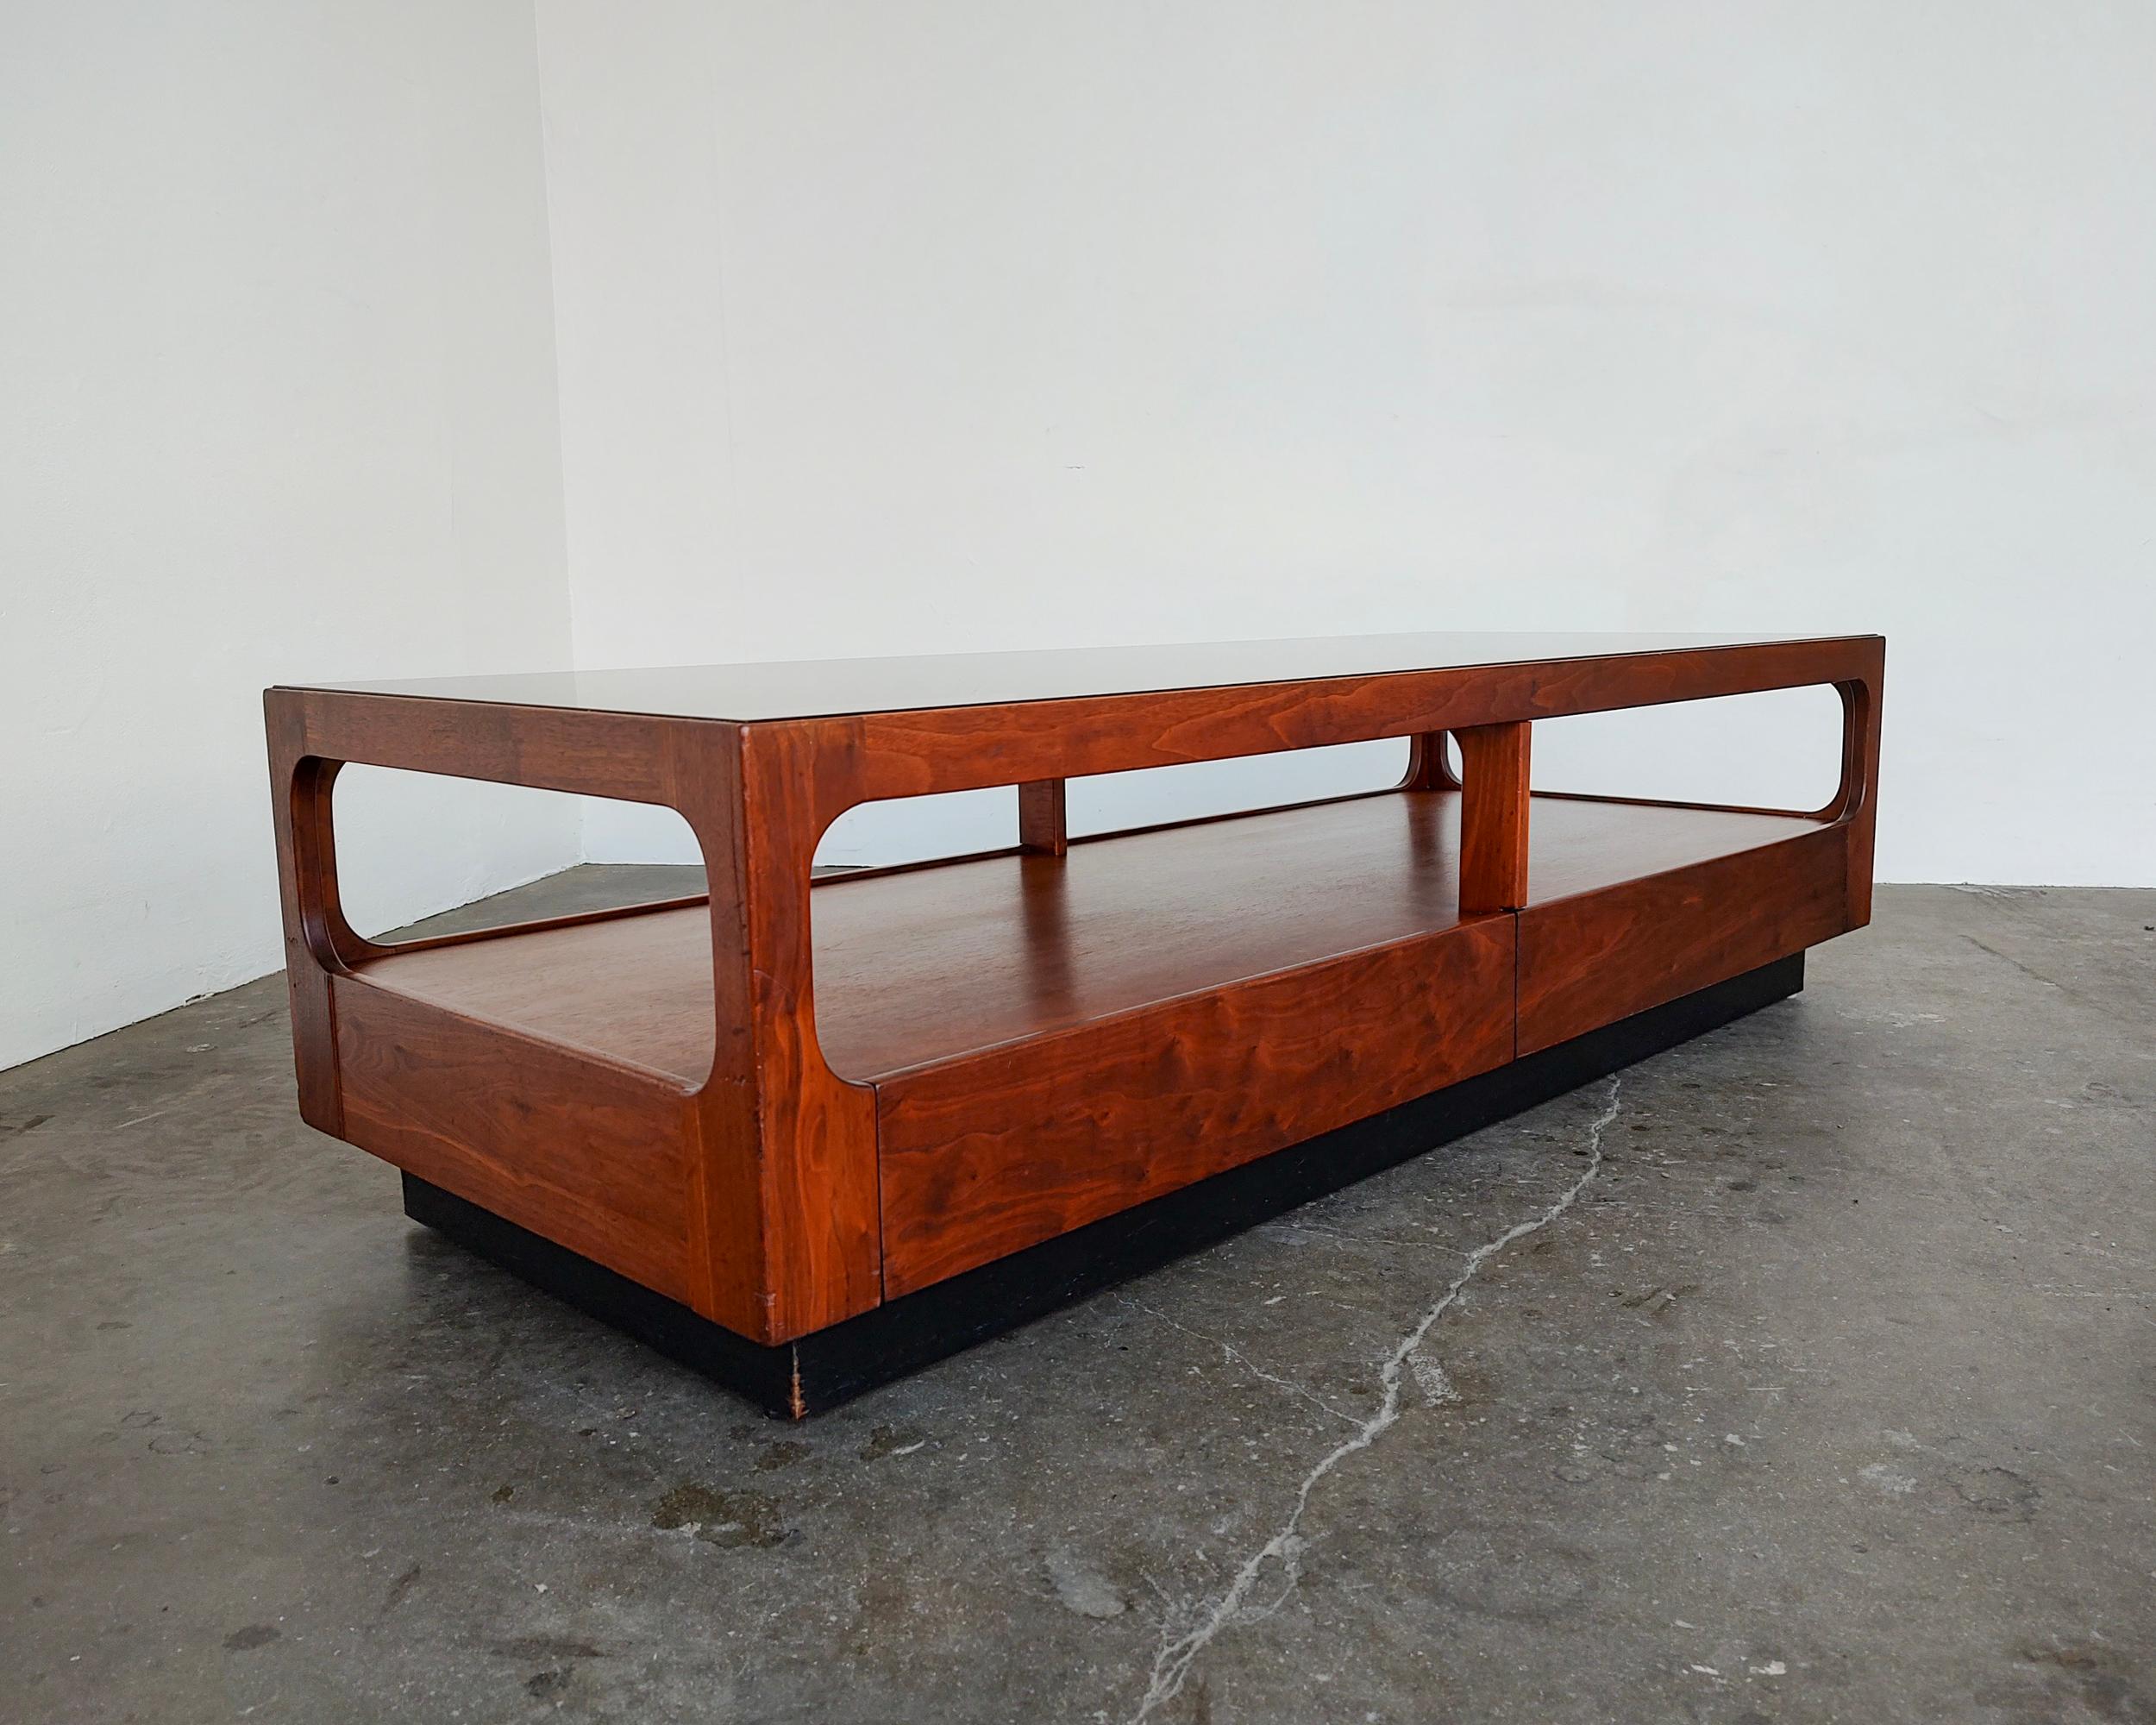 Classic mid-century modern walnut wood and smokey glass coffee table designed by John Keal for Brown Saltman. Contrasting platform black base. Features one drawer with original label inside. Glass in excellent condition, no scratches or chips. Wood